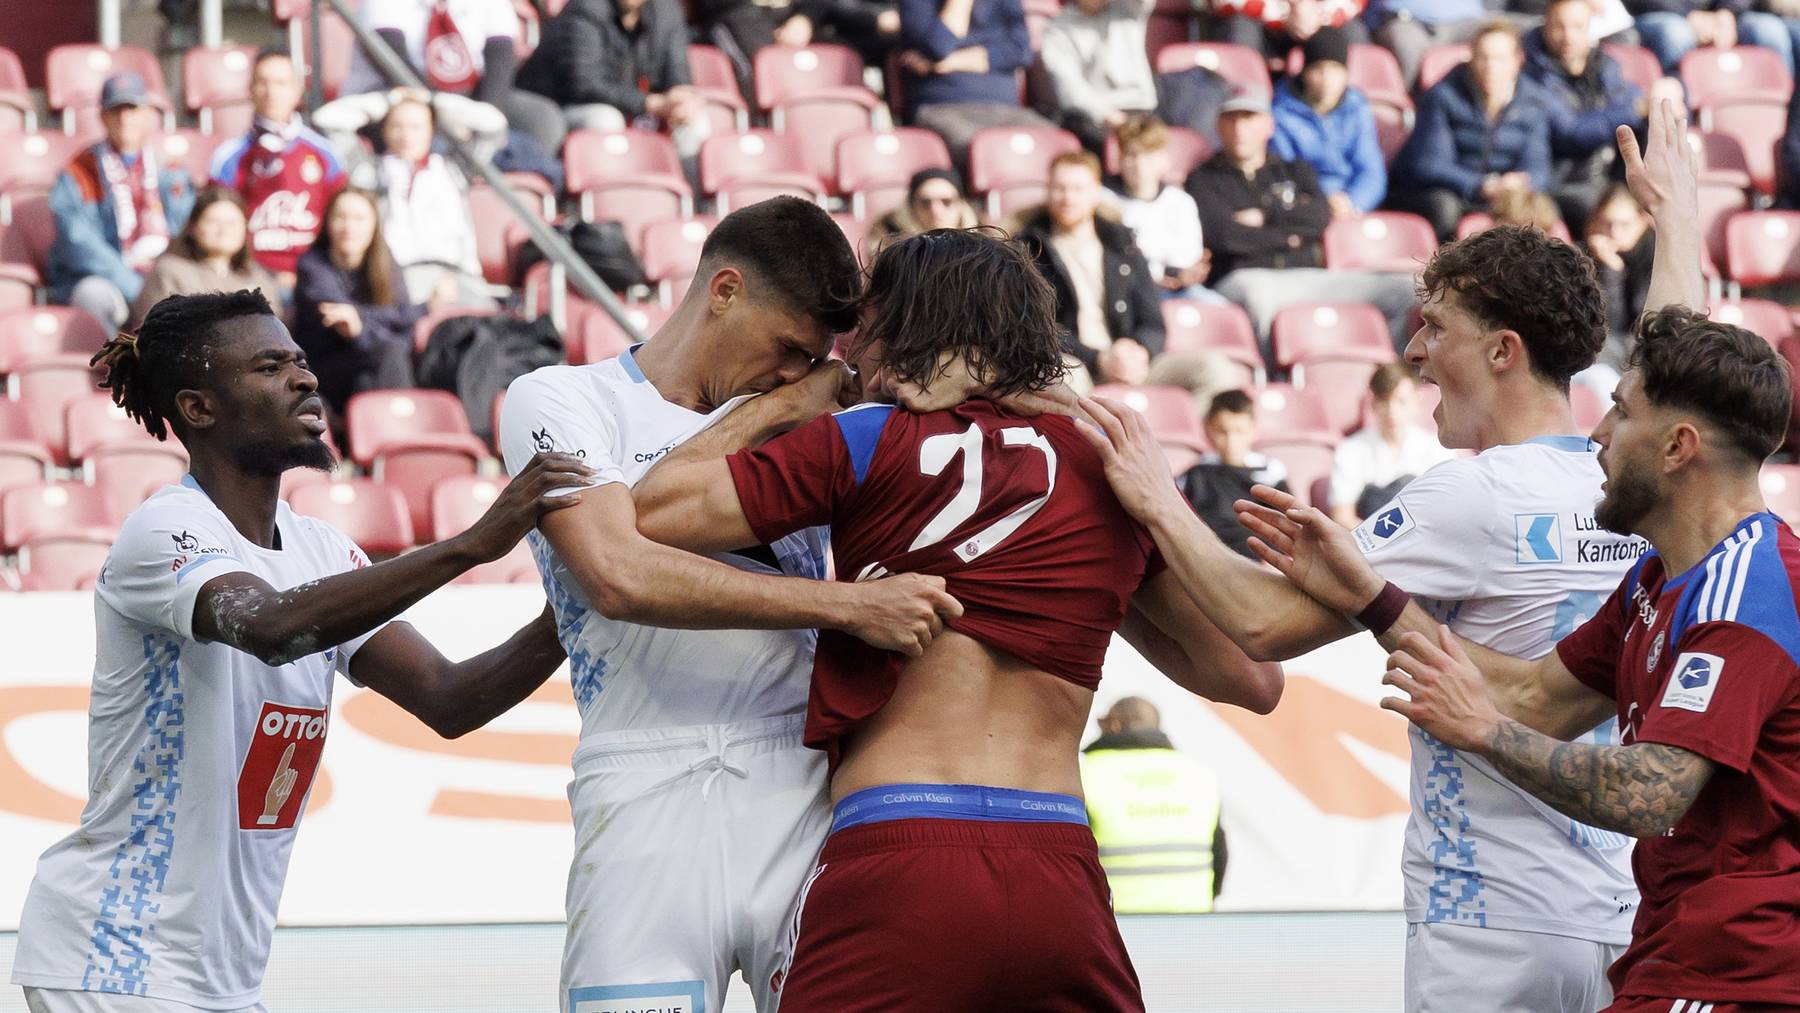 Servette's forward Enzo Crivelli, centre, headbutts Luzern's defender Ismajl Beka, 2nd left, and is sent off, during the Super League soccer match of Swiss Championship between Servette FC and Luzern, at the Stade de Geneve stadium, in Geneva, Switzerland, Sunday, March 12, 2023.